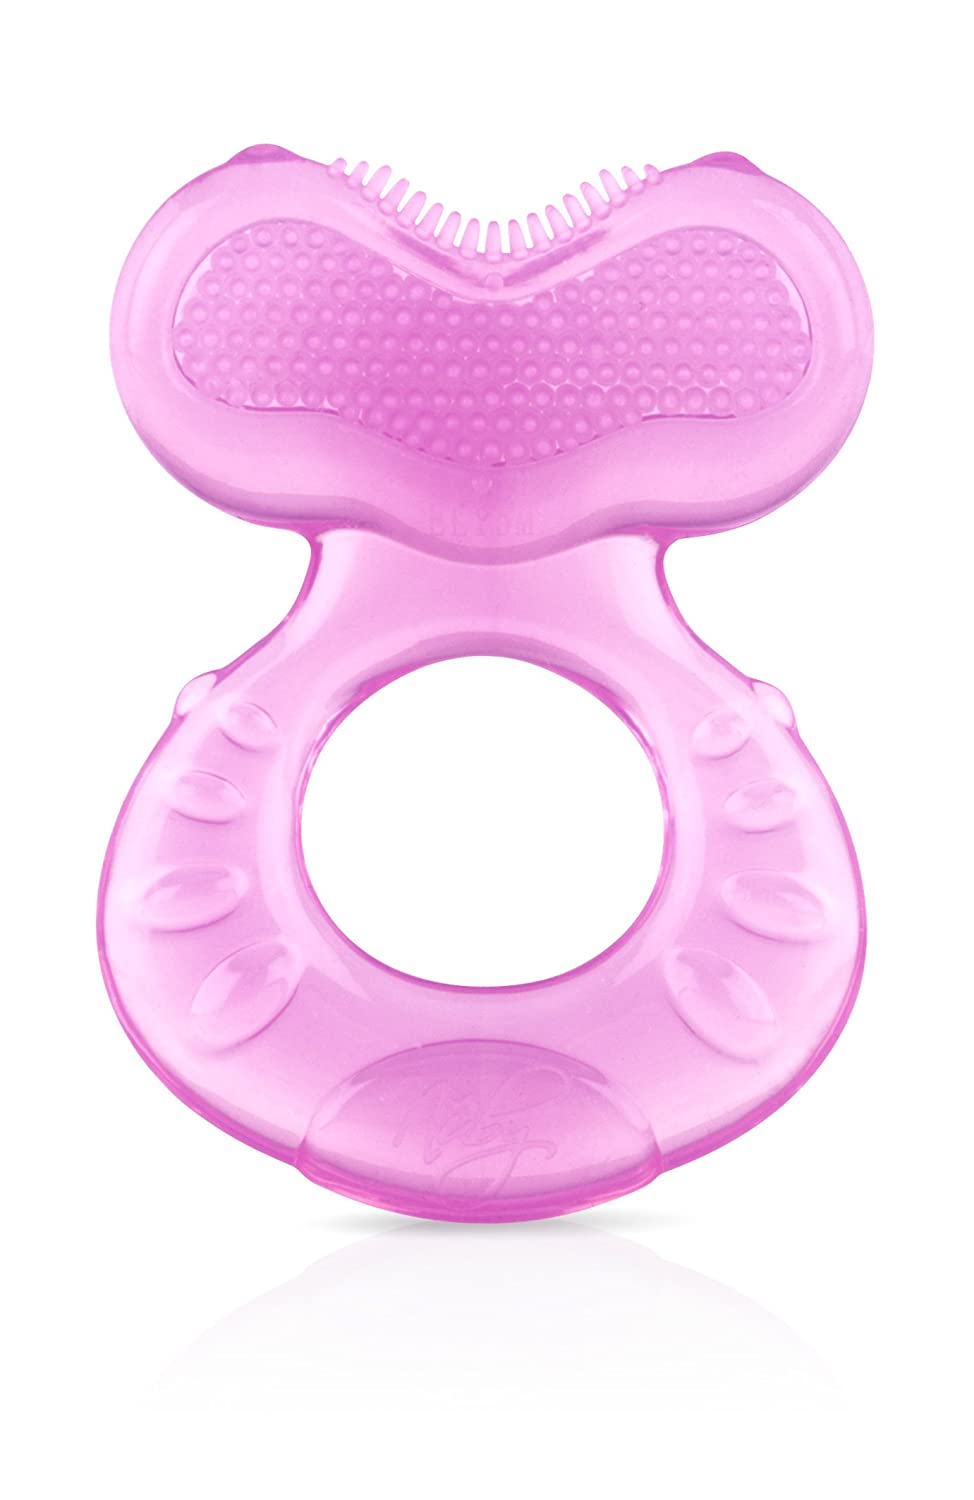 Nuby Silicone Teethe-eez Teether with Bristles, Includes Hygienic Case,  Pink – Homefurniturelife Online Store